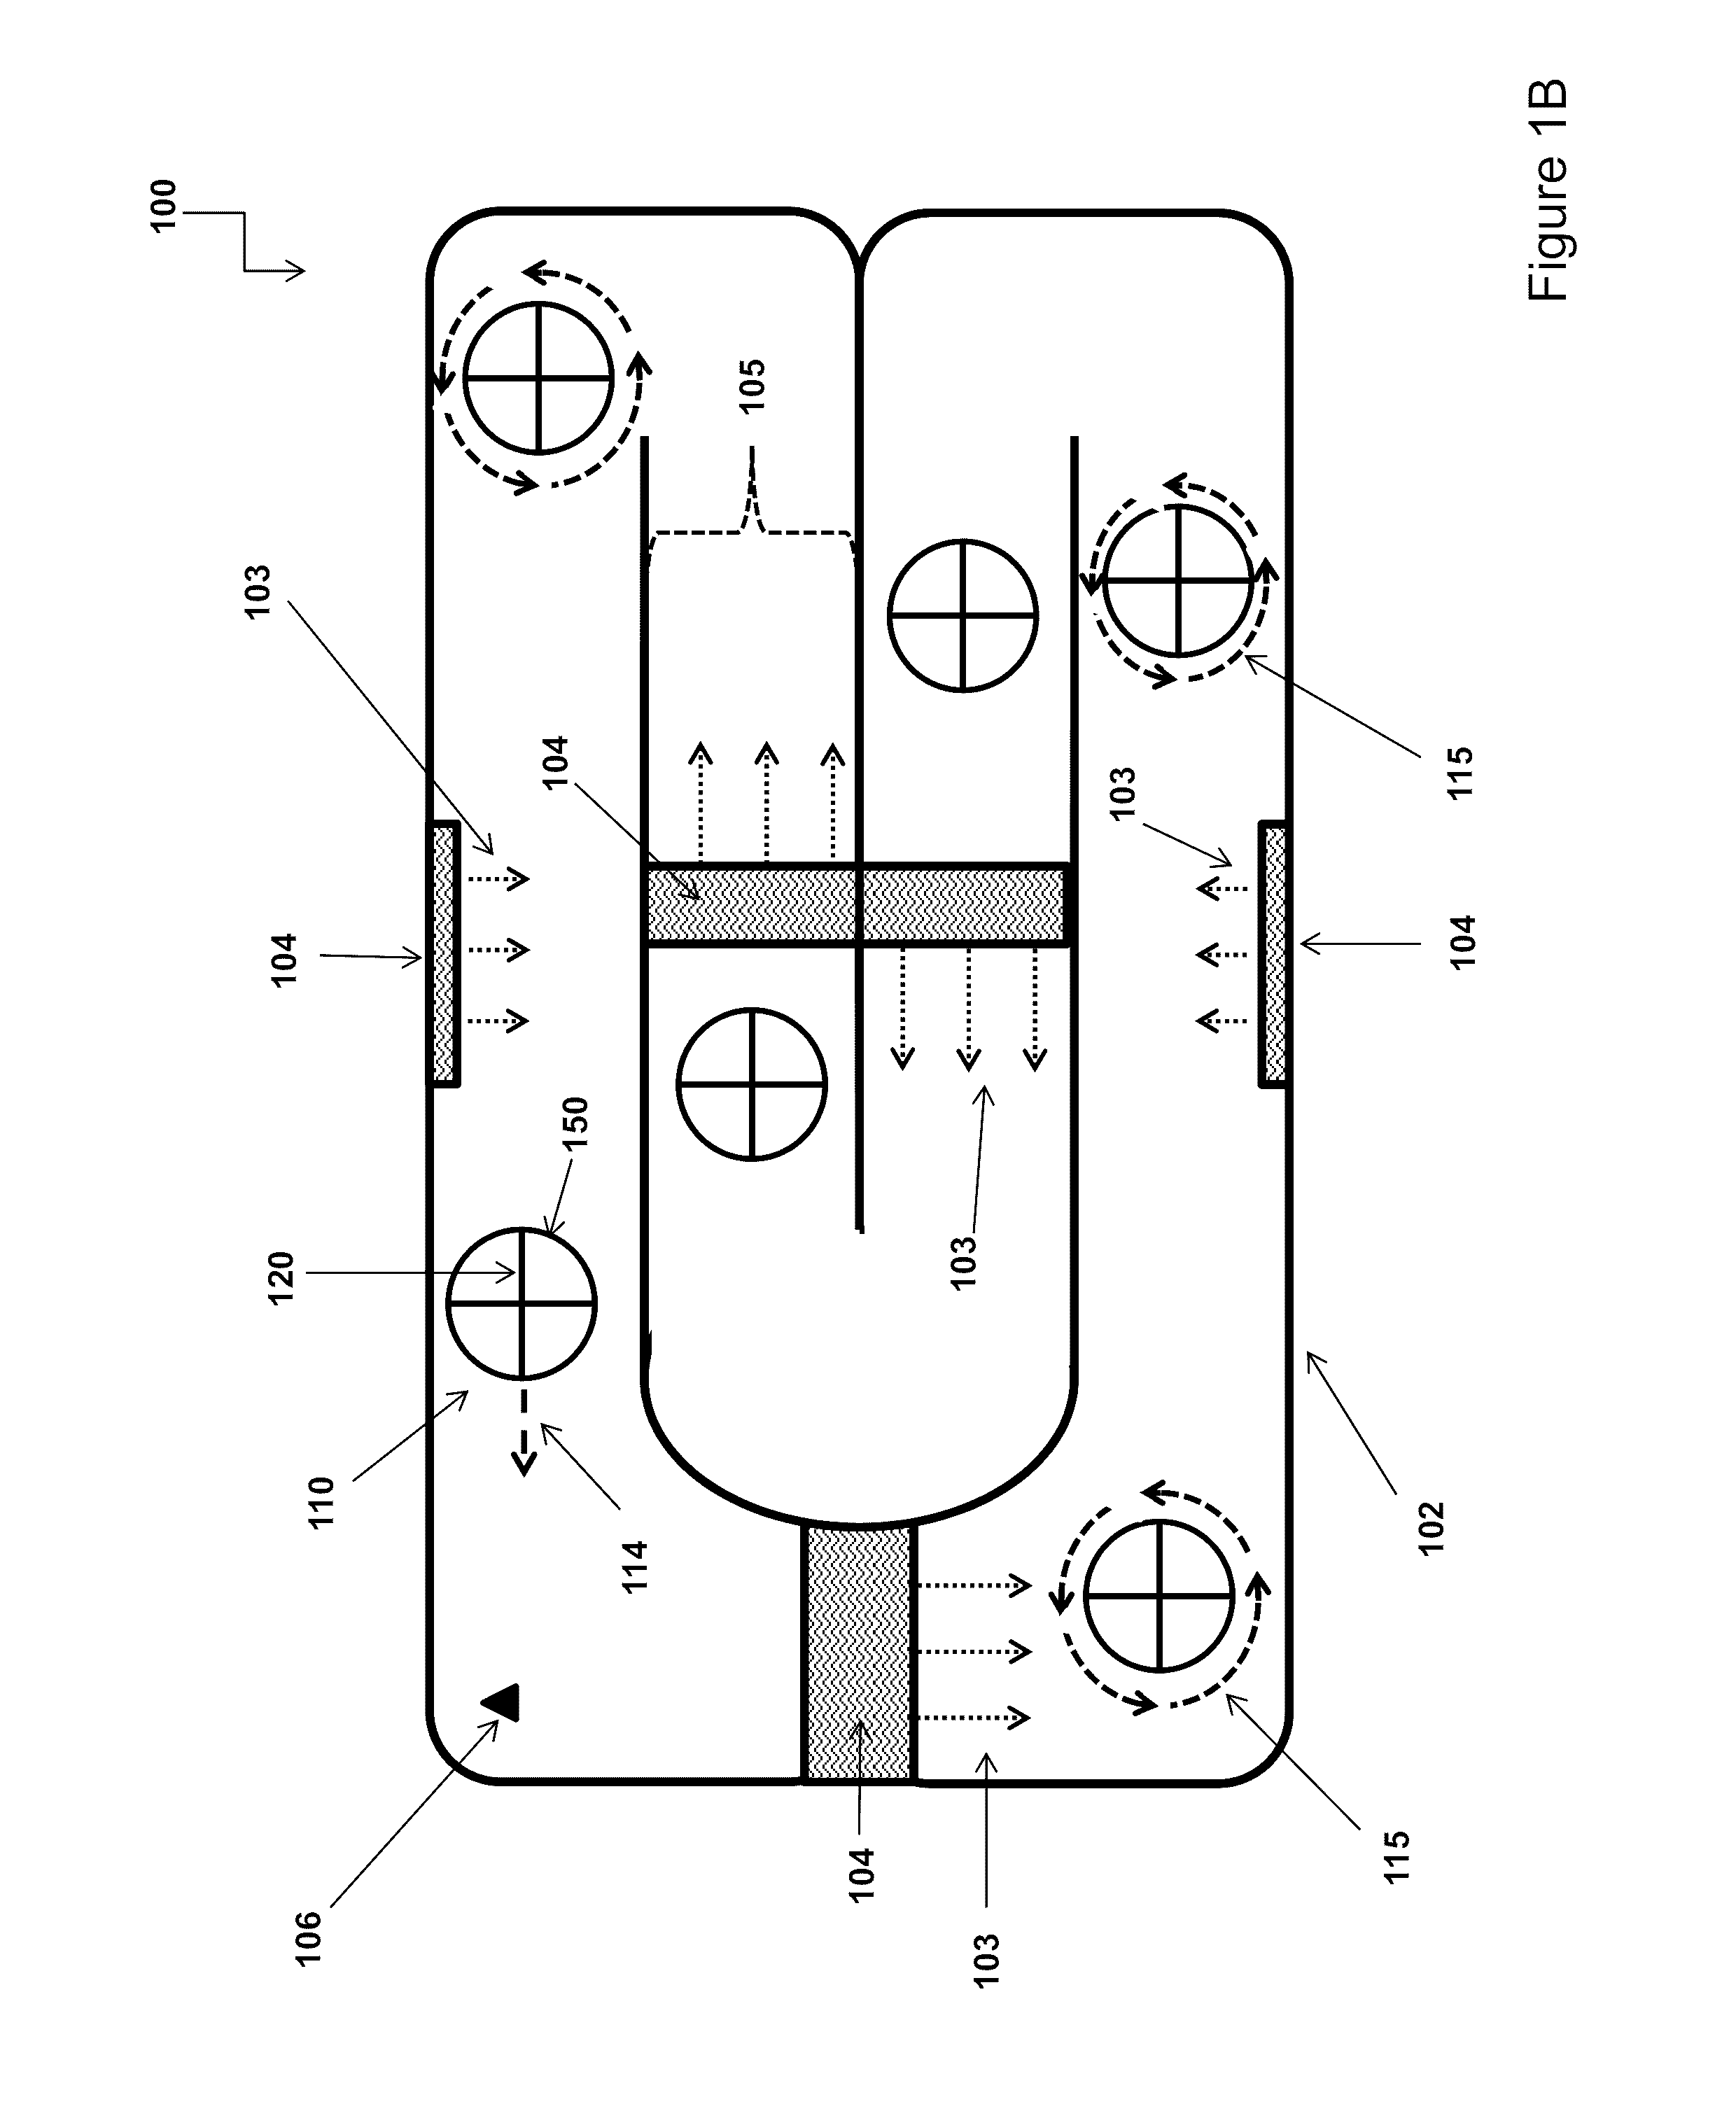 Apparatuses, methods, and systems for cultivating a microcrop involving a floating coupling device